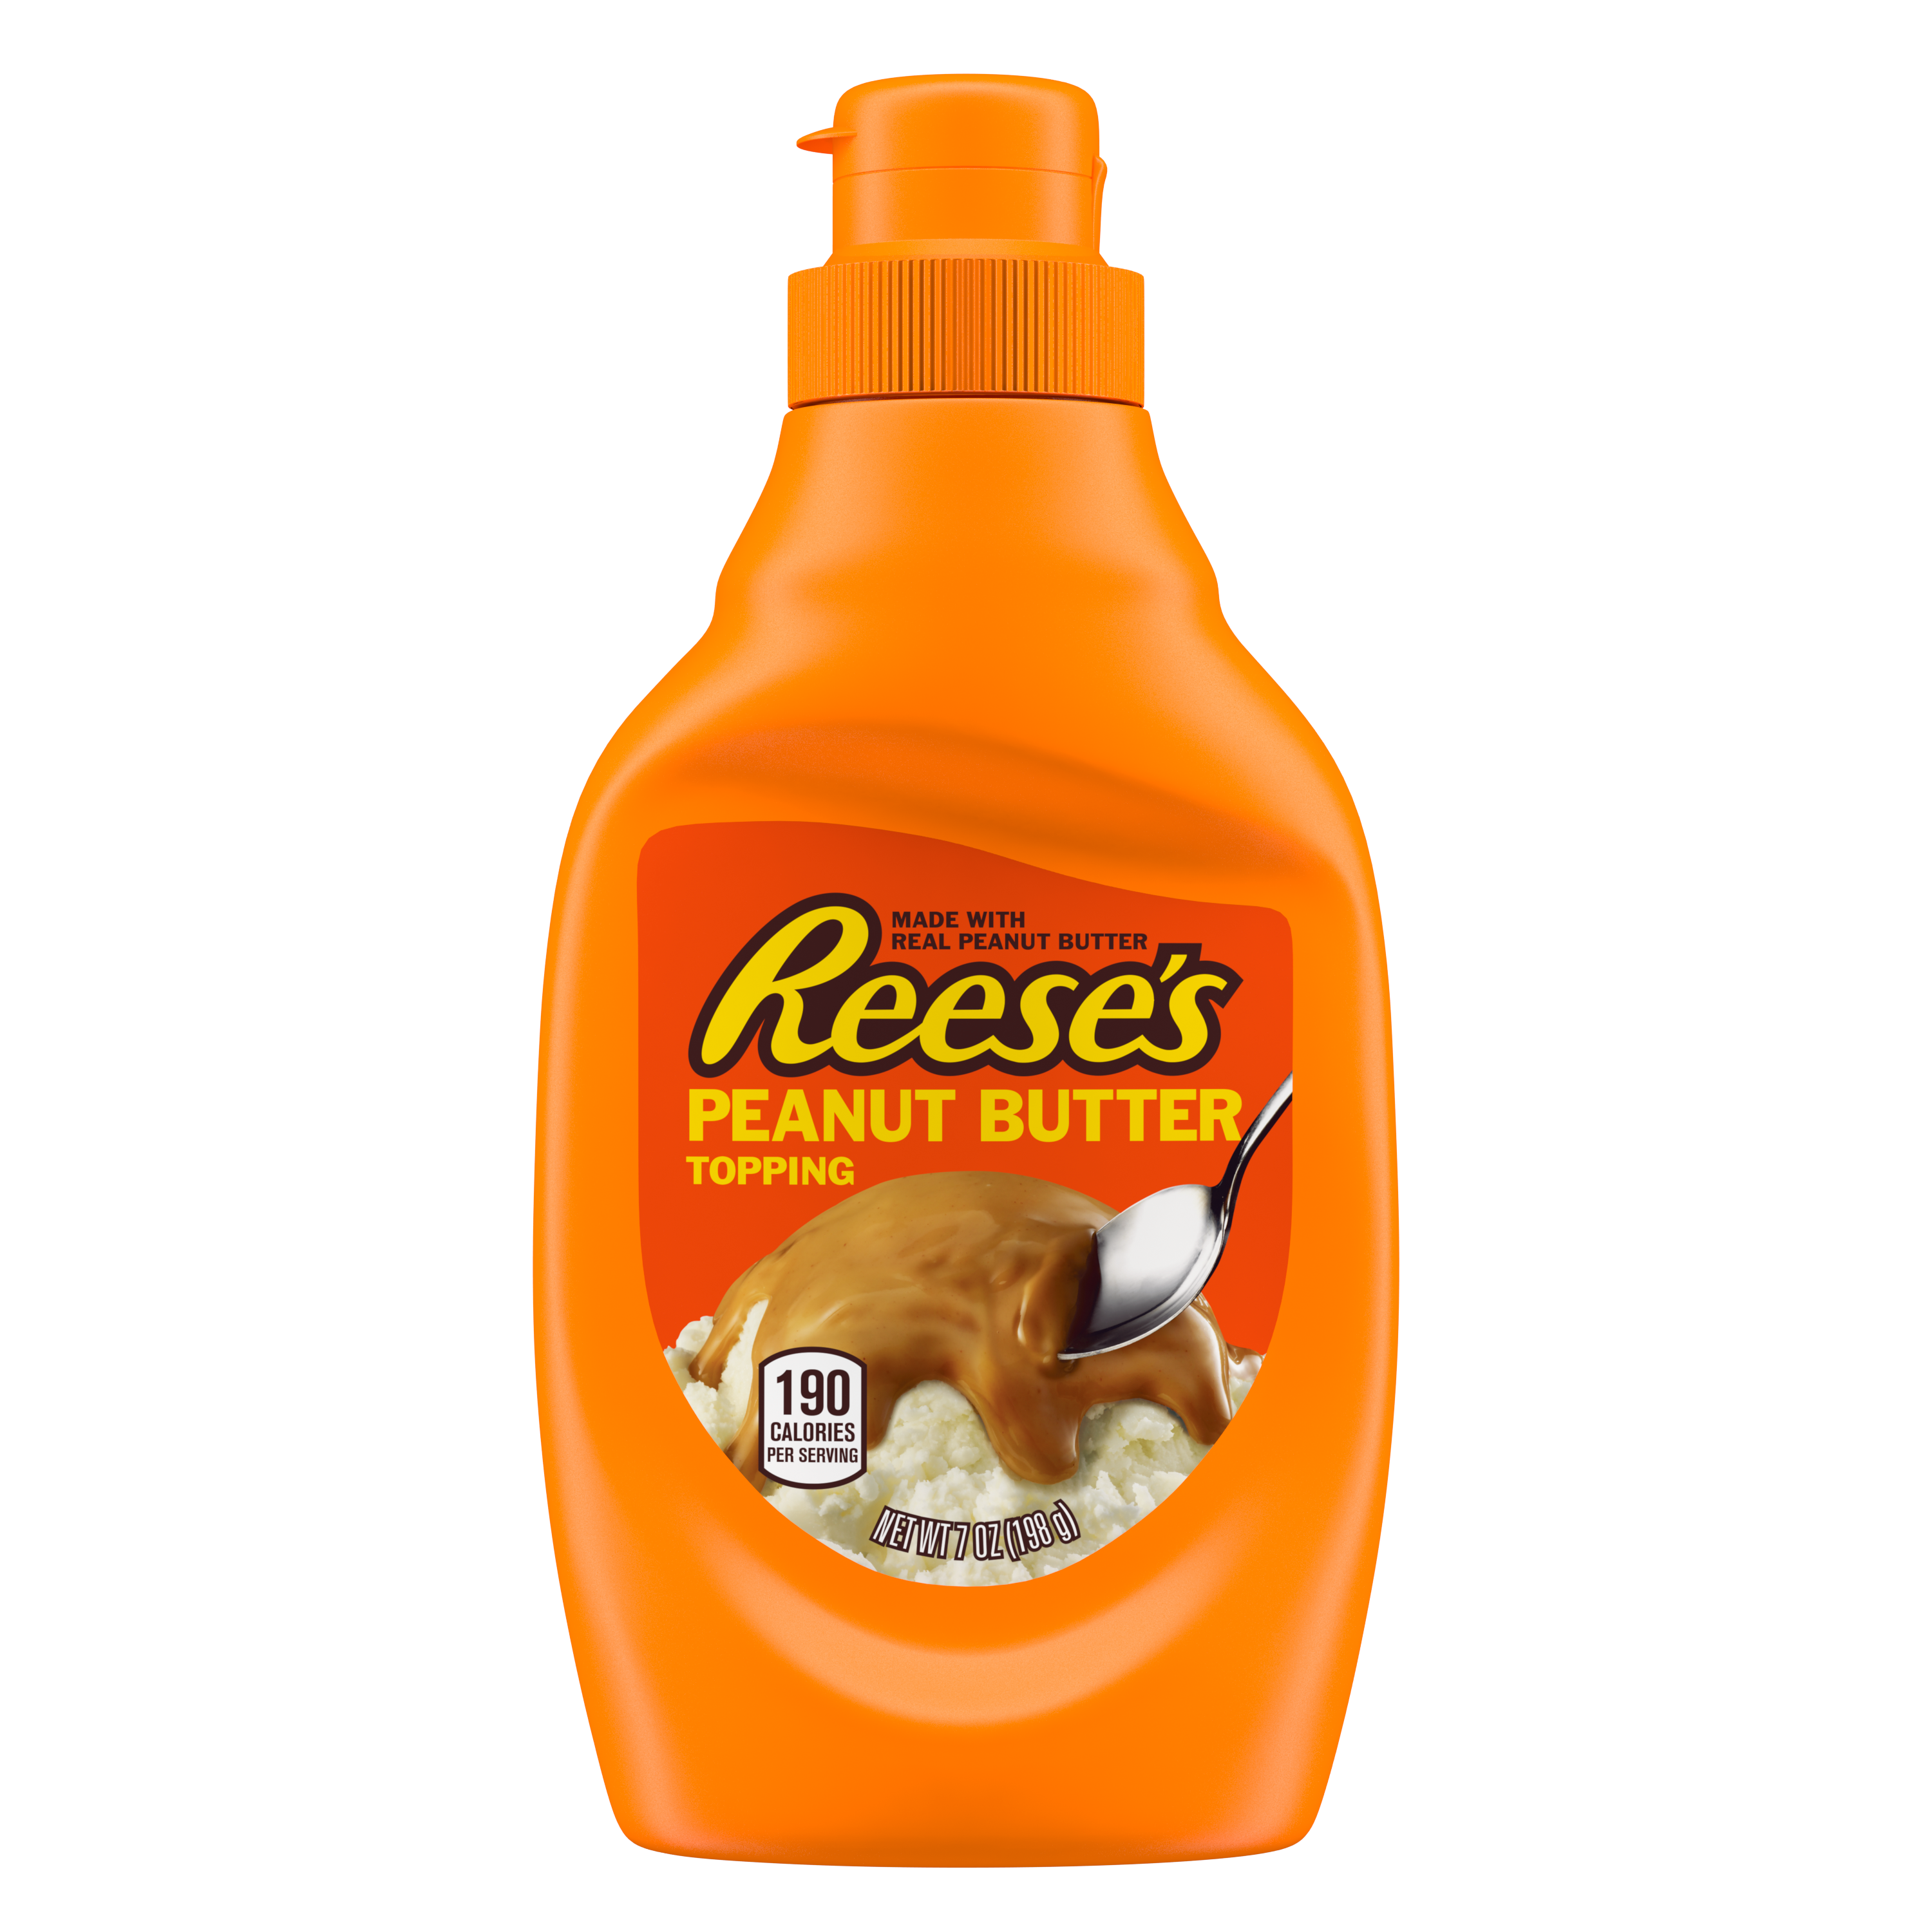 REESE'S Peanut Butter Topping, 7 oz bottle - Front of Package